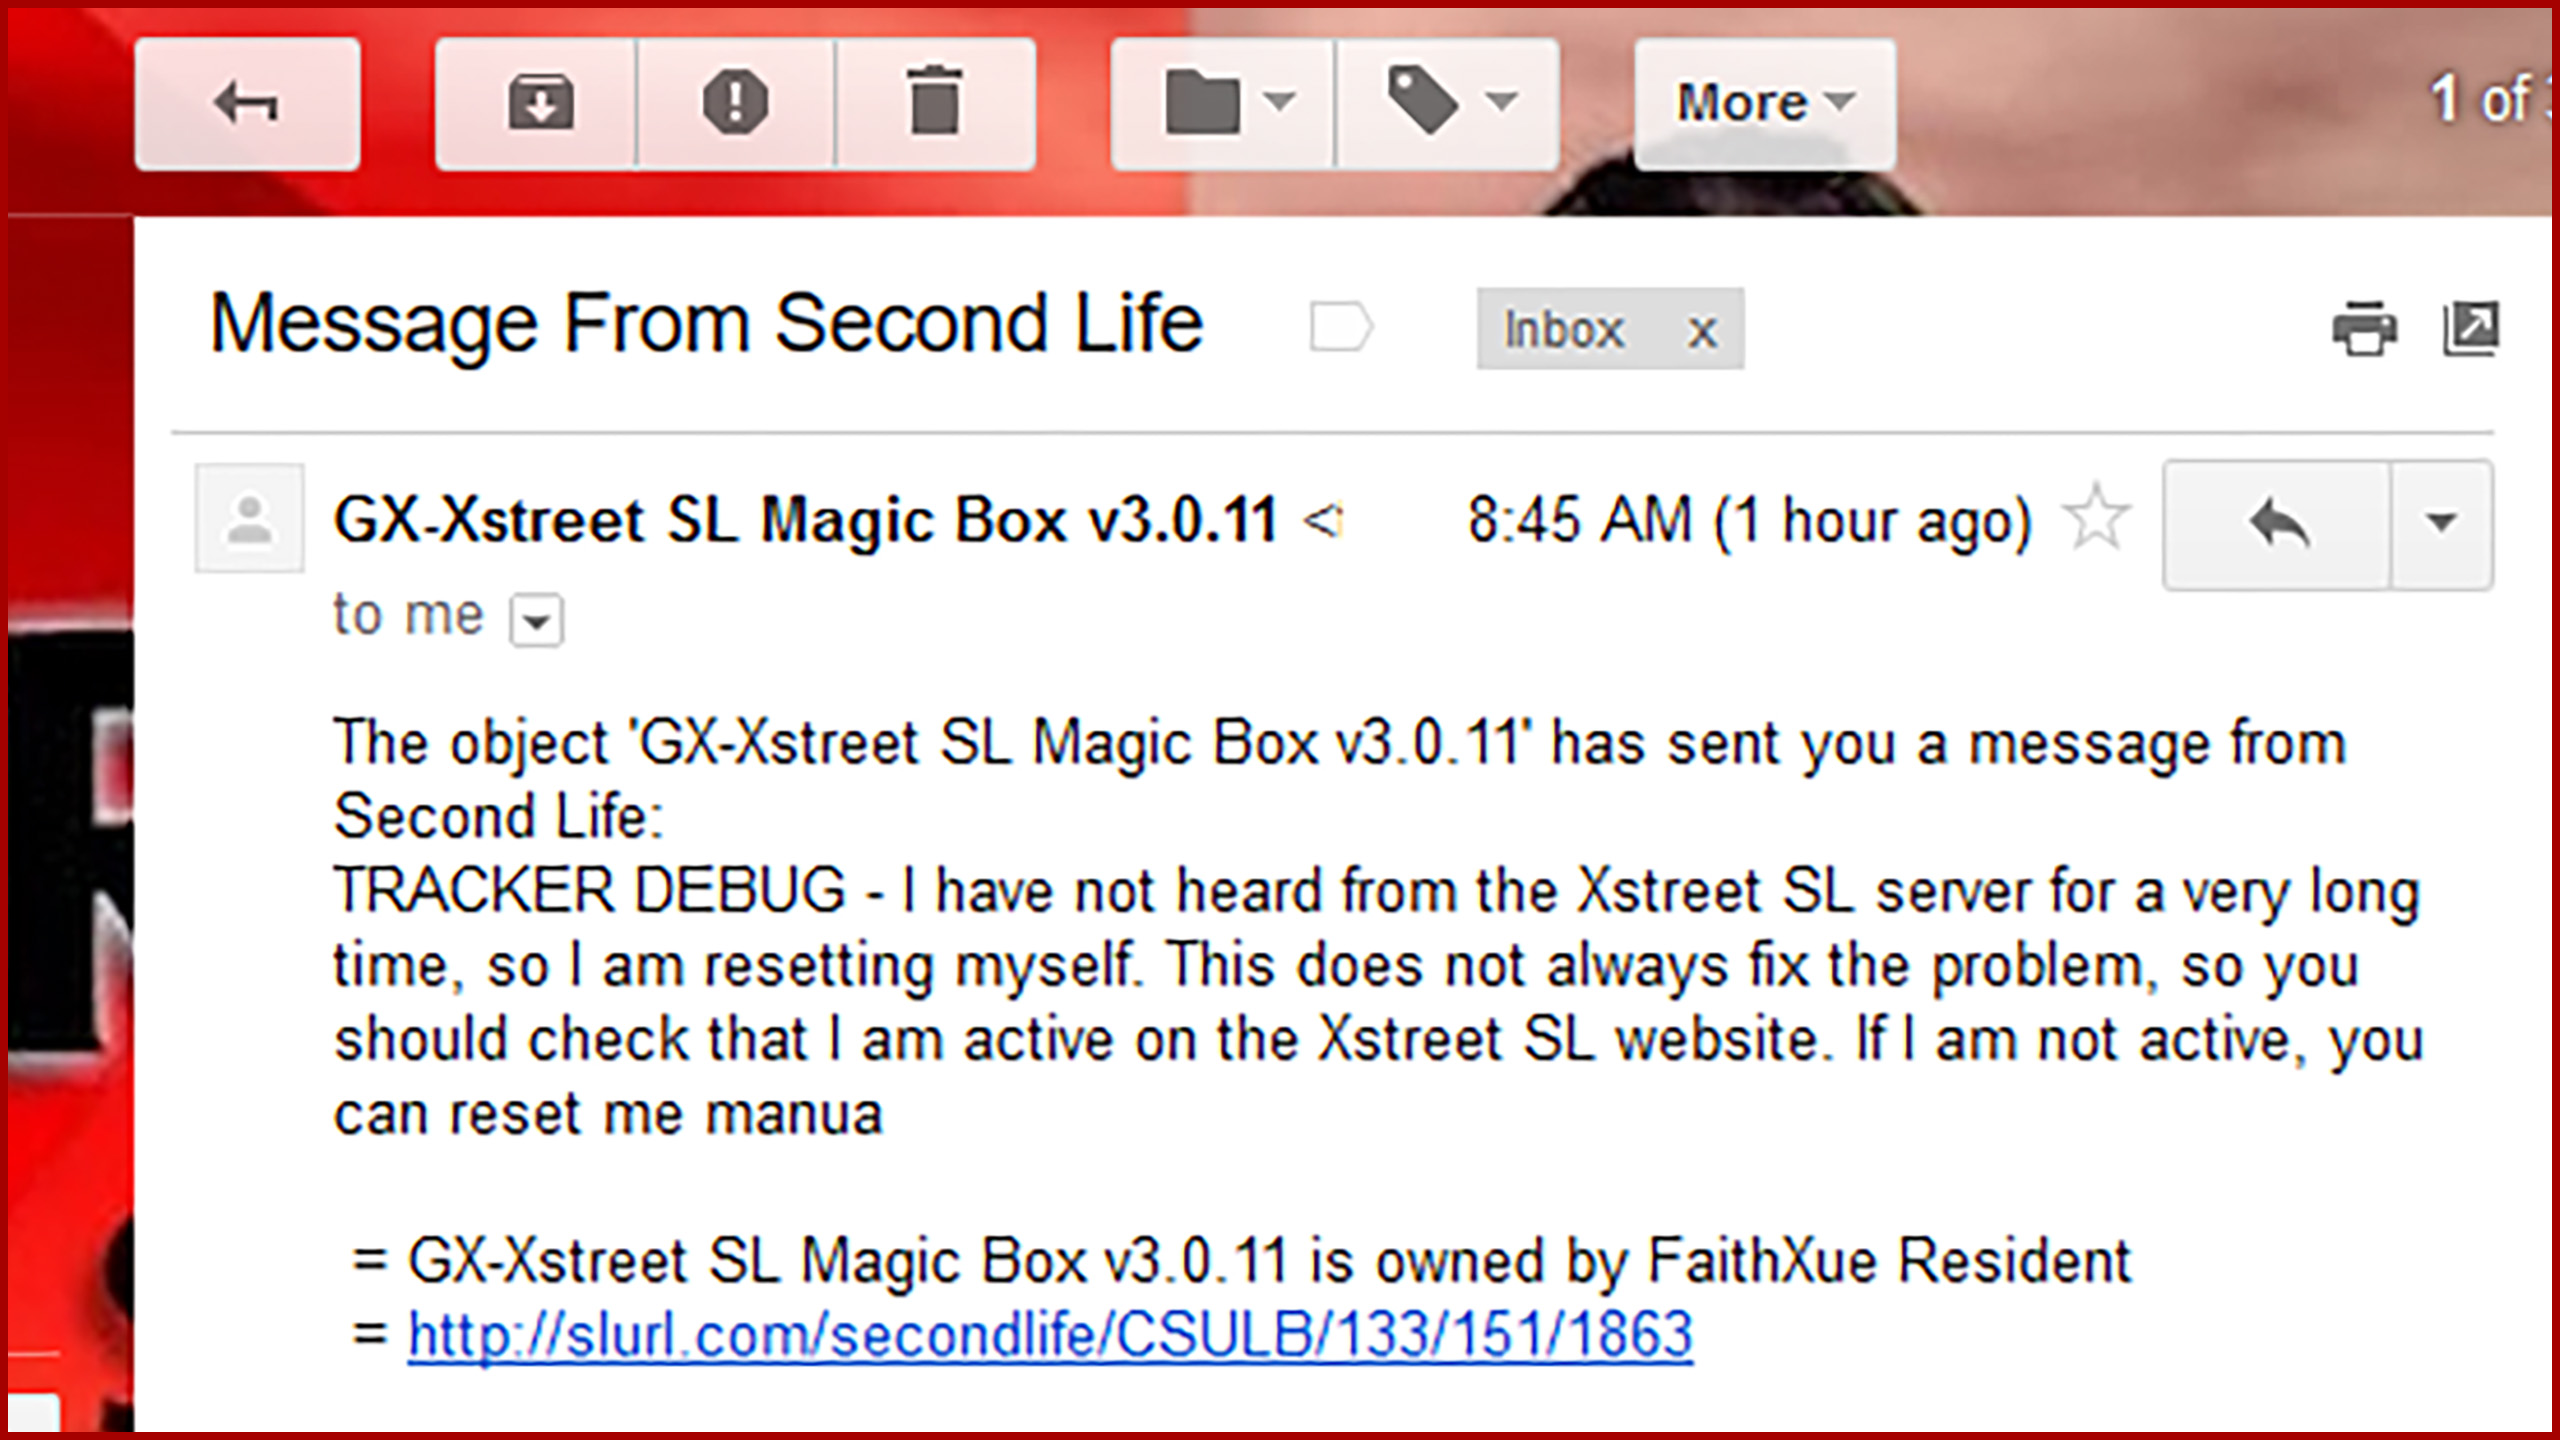 screen capture of an email message showing a Second Life "Magic Box" asking for connection